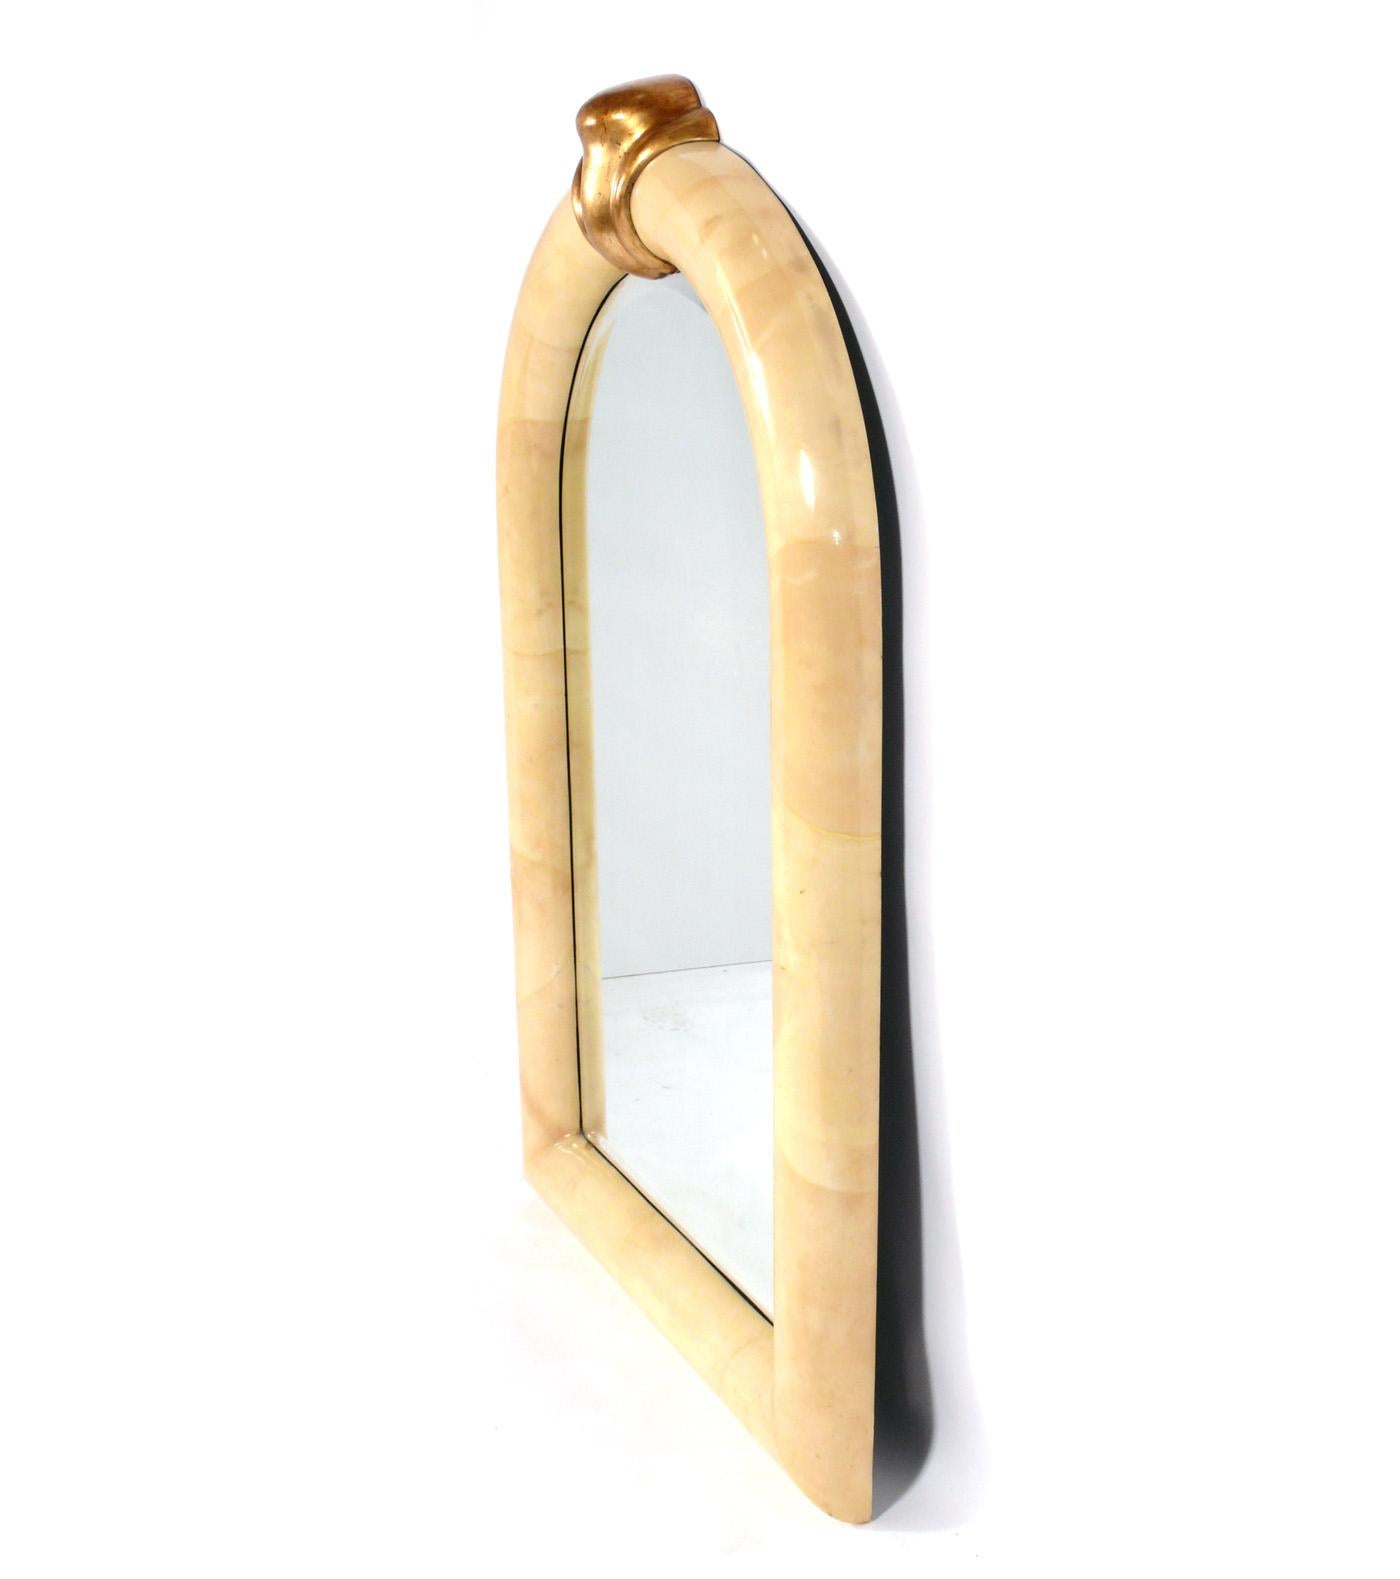 Karl Springer Style Large Scale Goatskin Mirror, American, circa 1980s. It measures an impressive 58.5